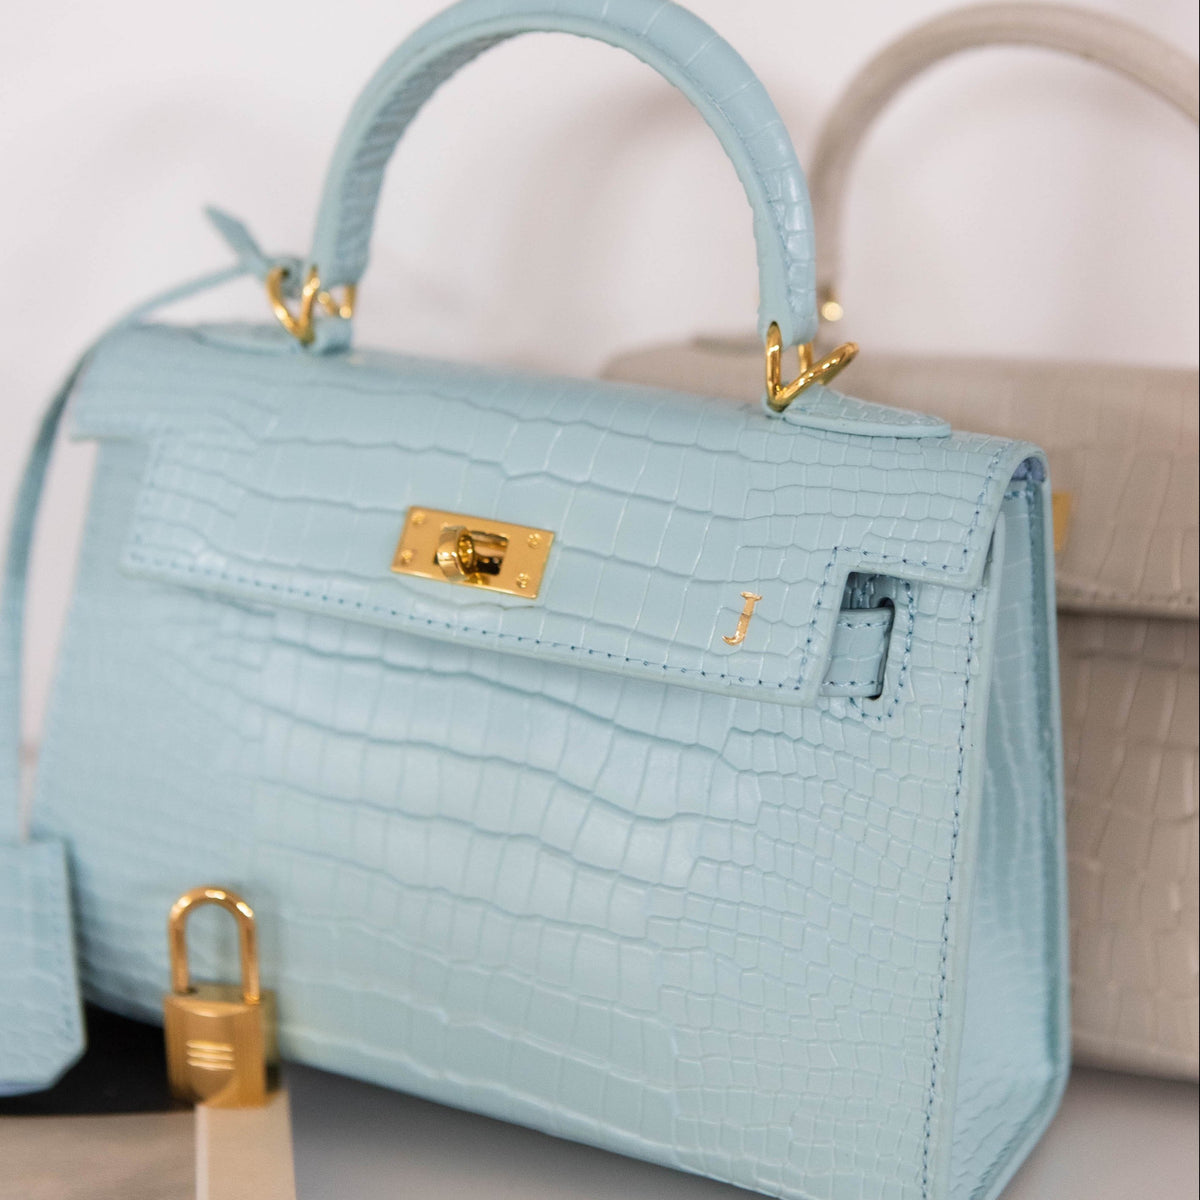 Bags  Baby Ice Blue Birkin Style Handbag Leather Made In Italy